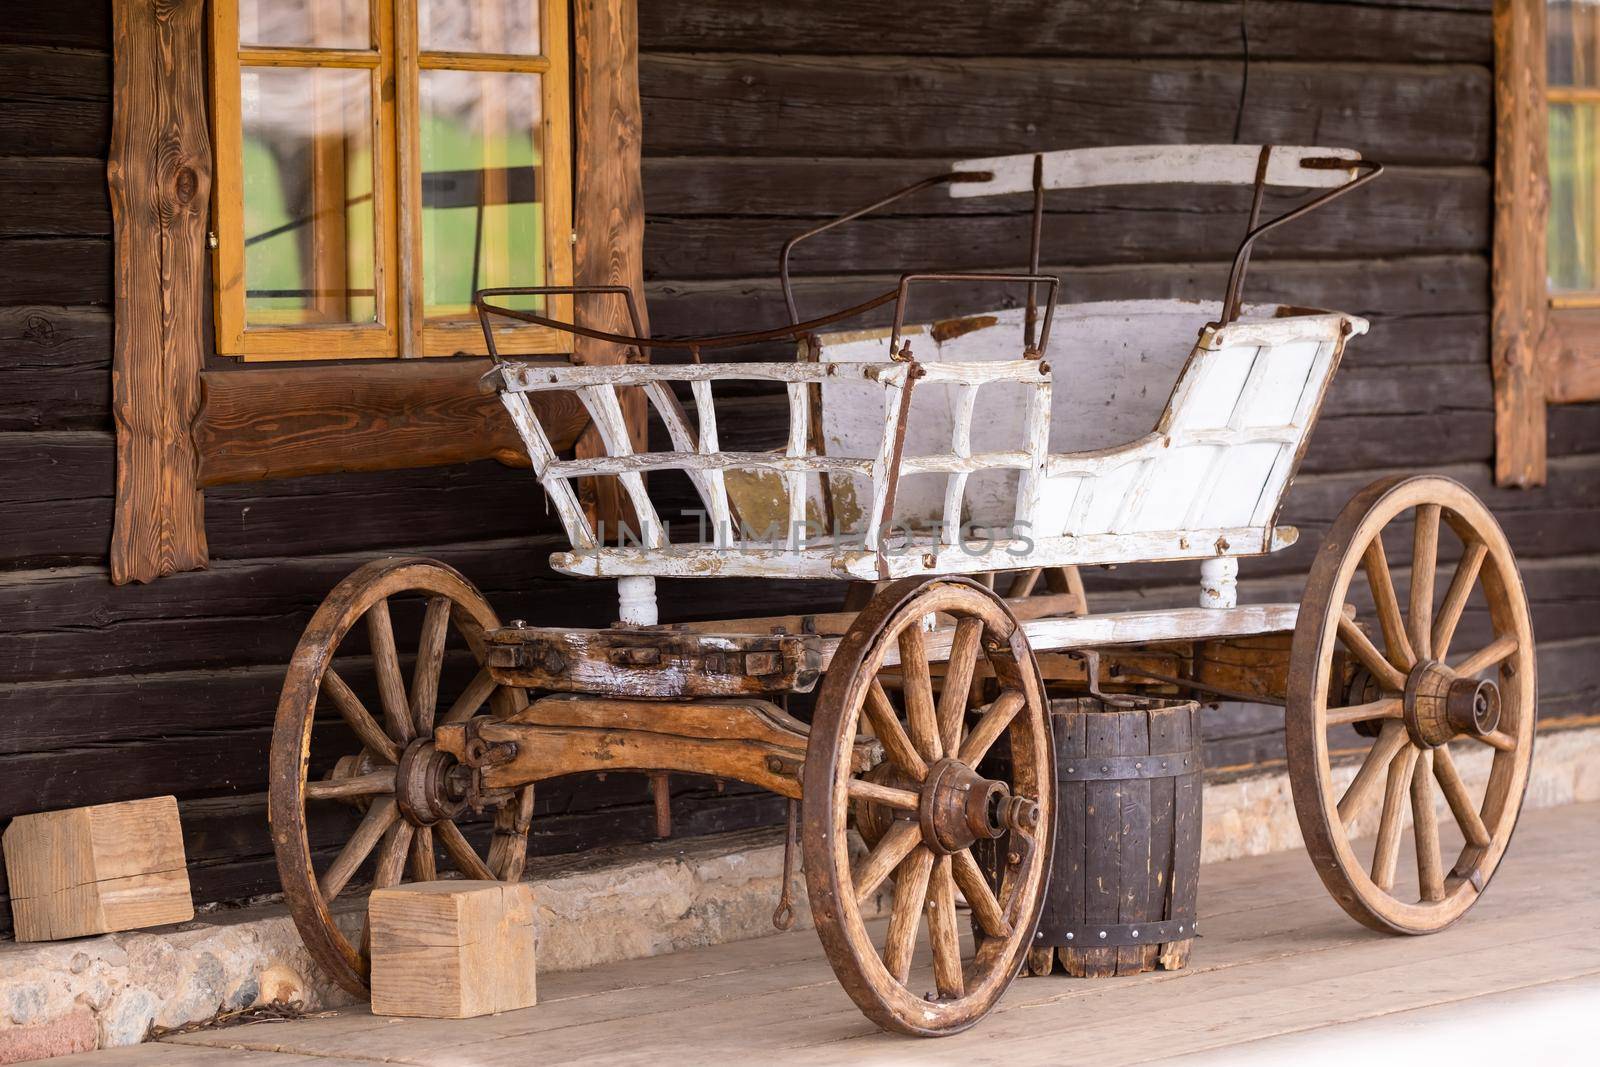 An empty antique carriage stands on a ranch in the wild West.